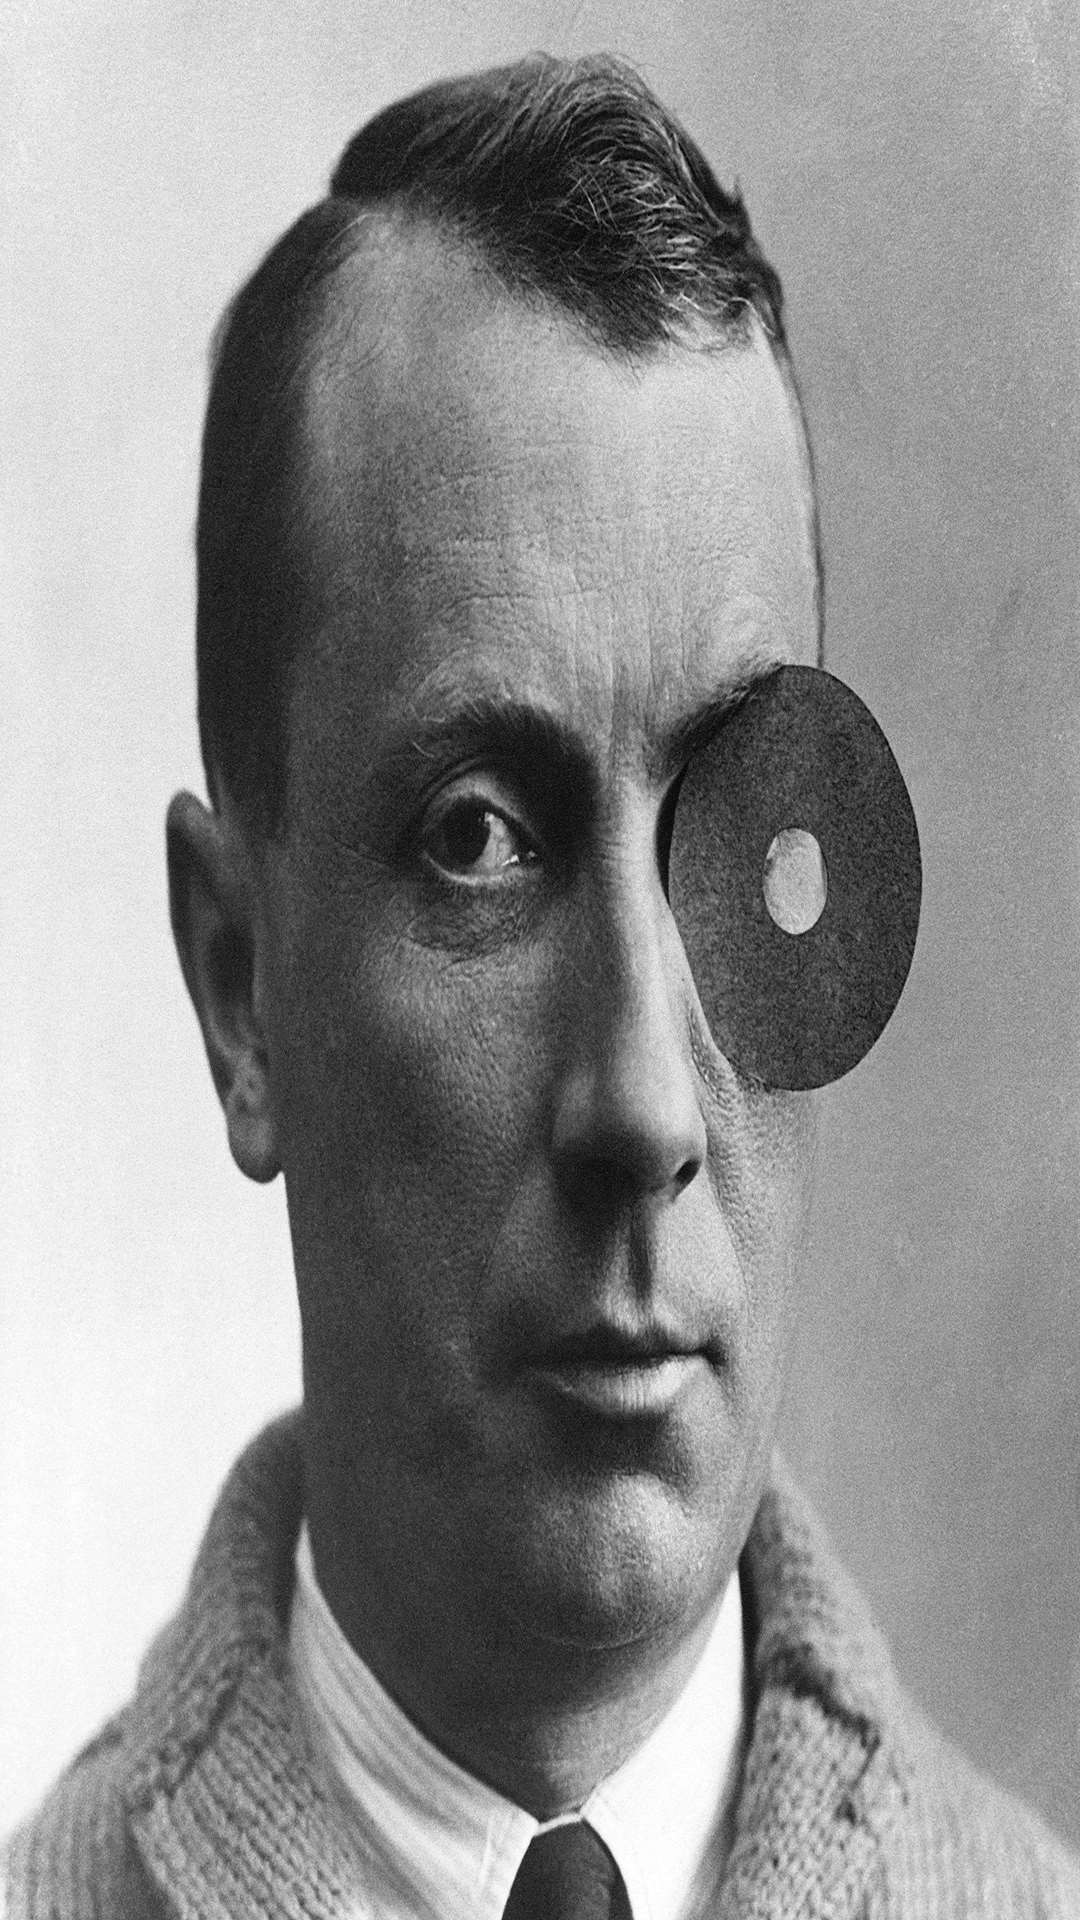 Jean Hans Arp was a German-French sculptor, painter, poet, and abstract artist